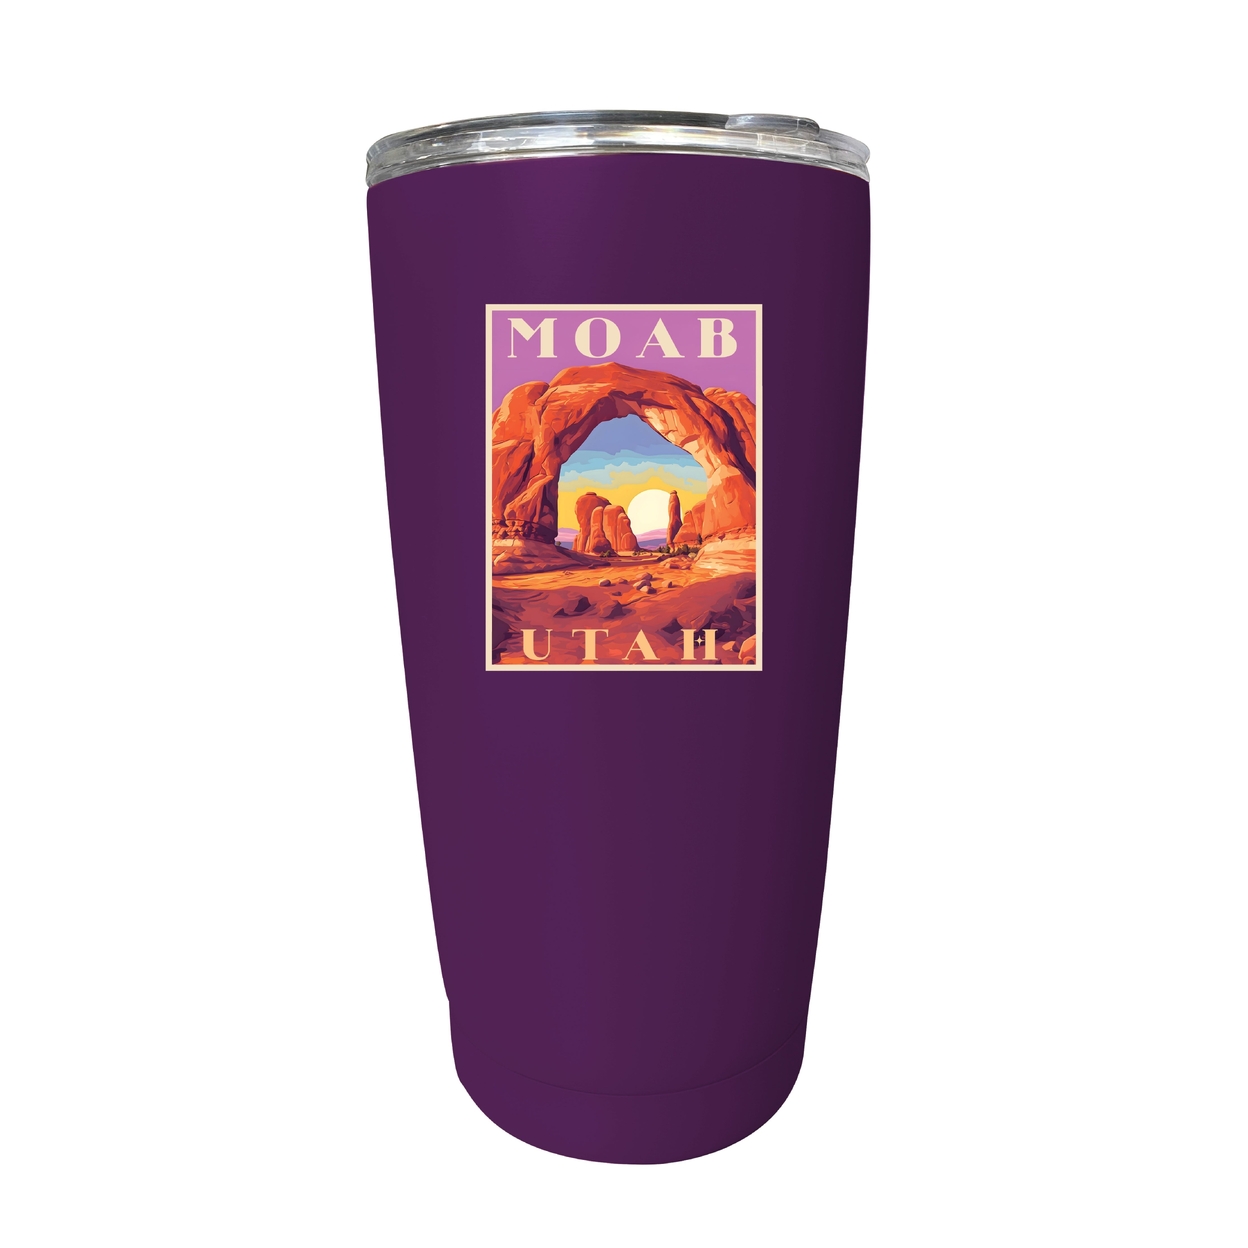 Moab Utah Souvenir 16 Oz Stainless Steel Insulated Tumbler - Pink,,2-Pack